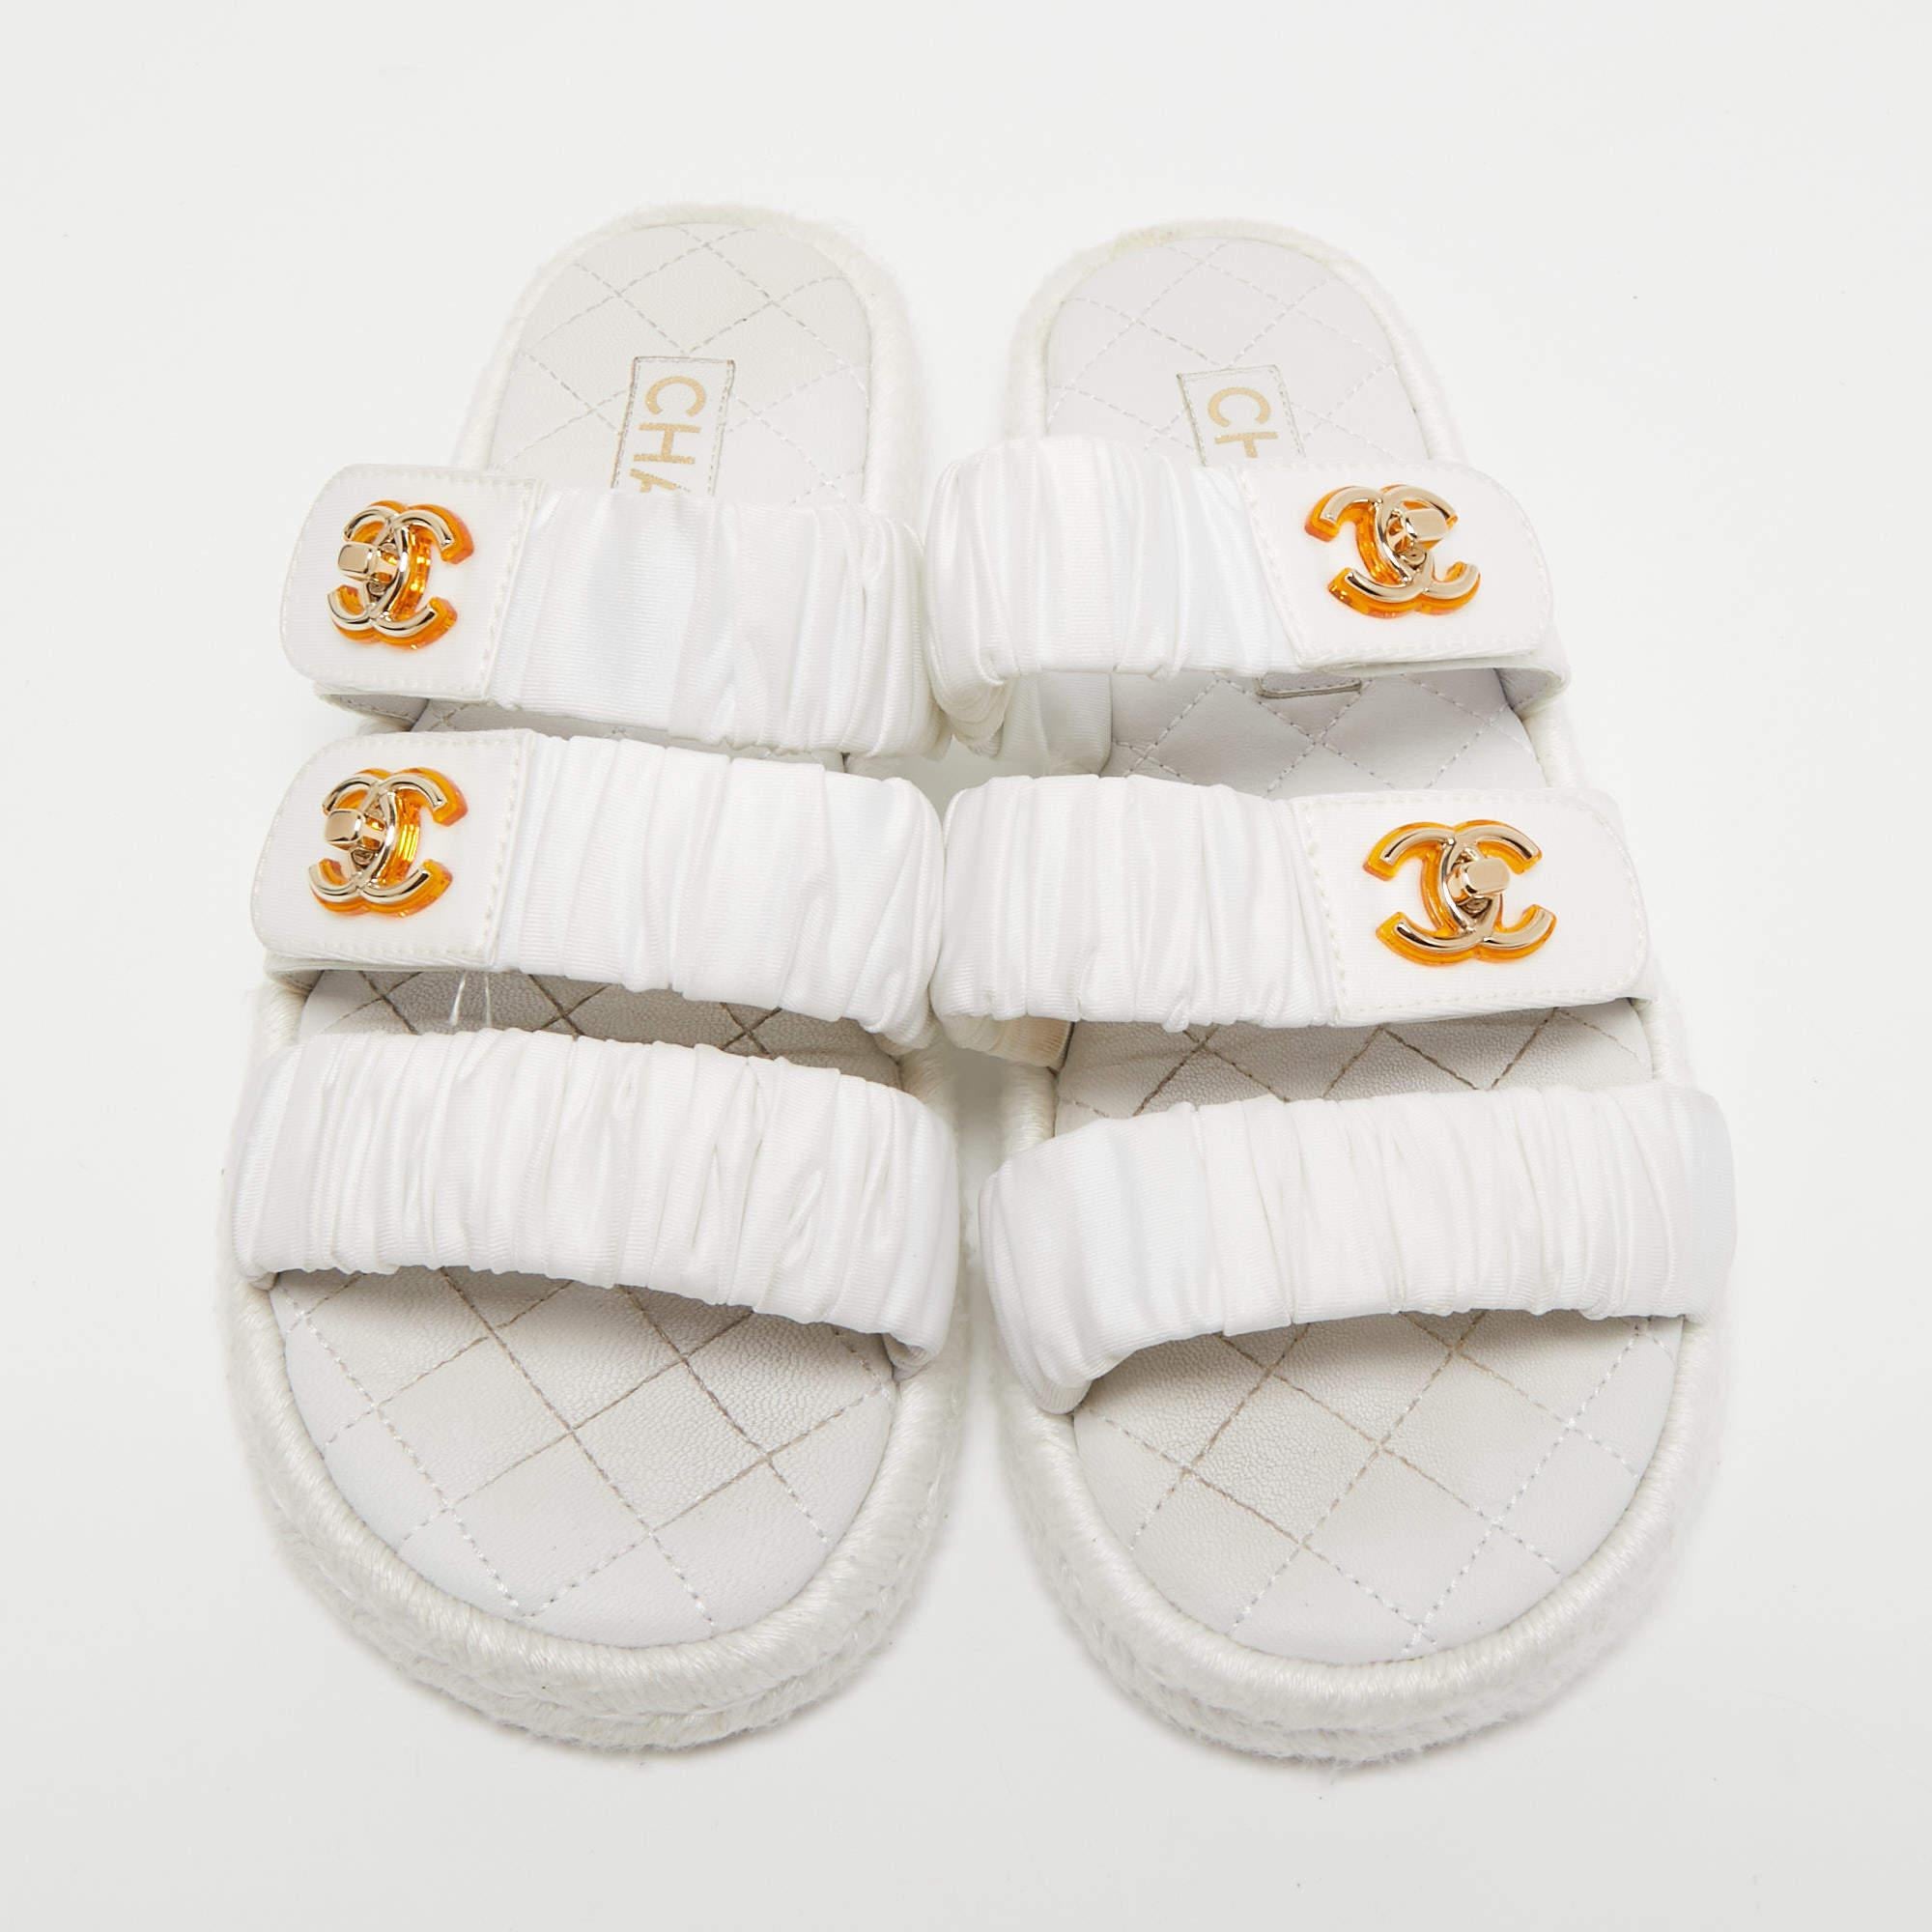 These slides are the best choice to experience never-ending comfort and style. They are designed using quality materials and have comfy leather-lined insoles.

